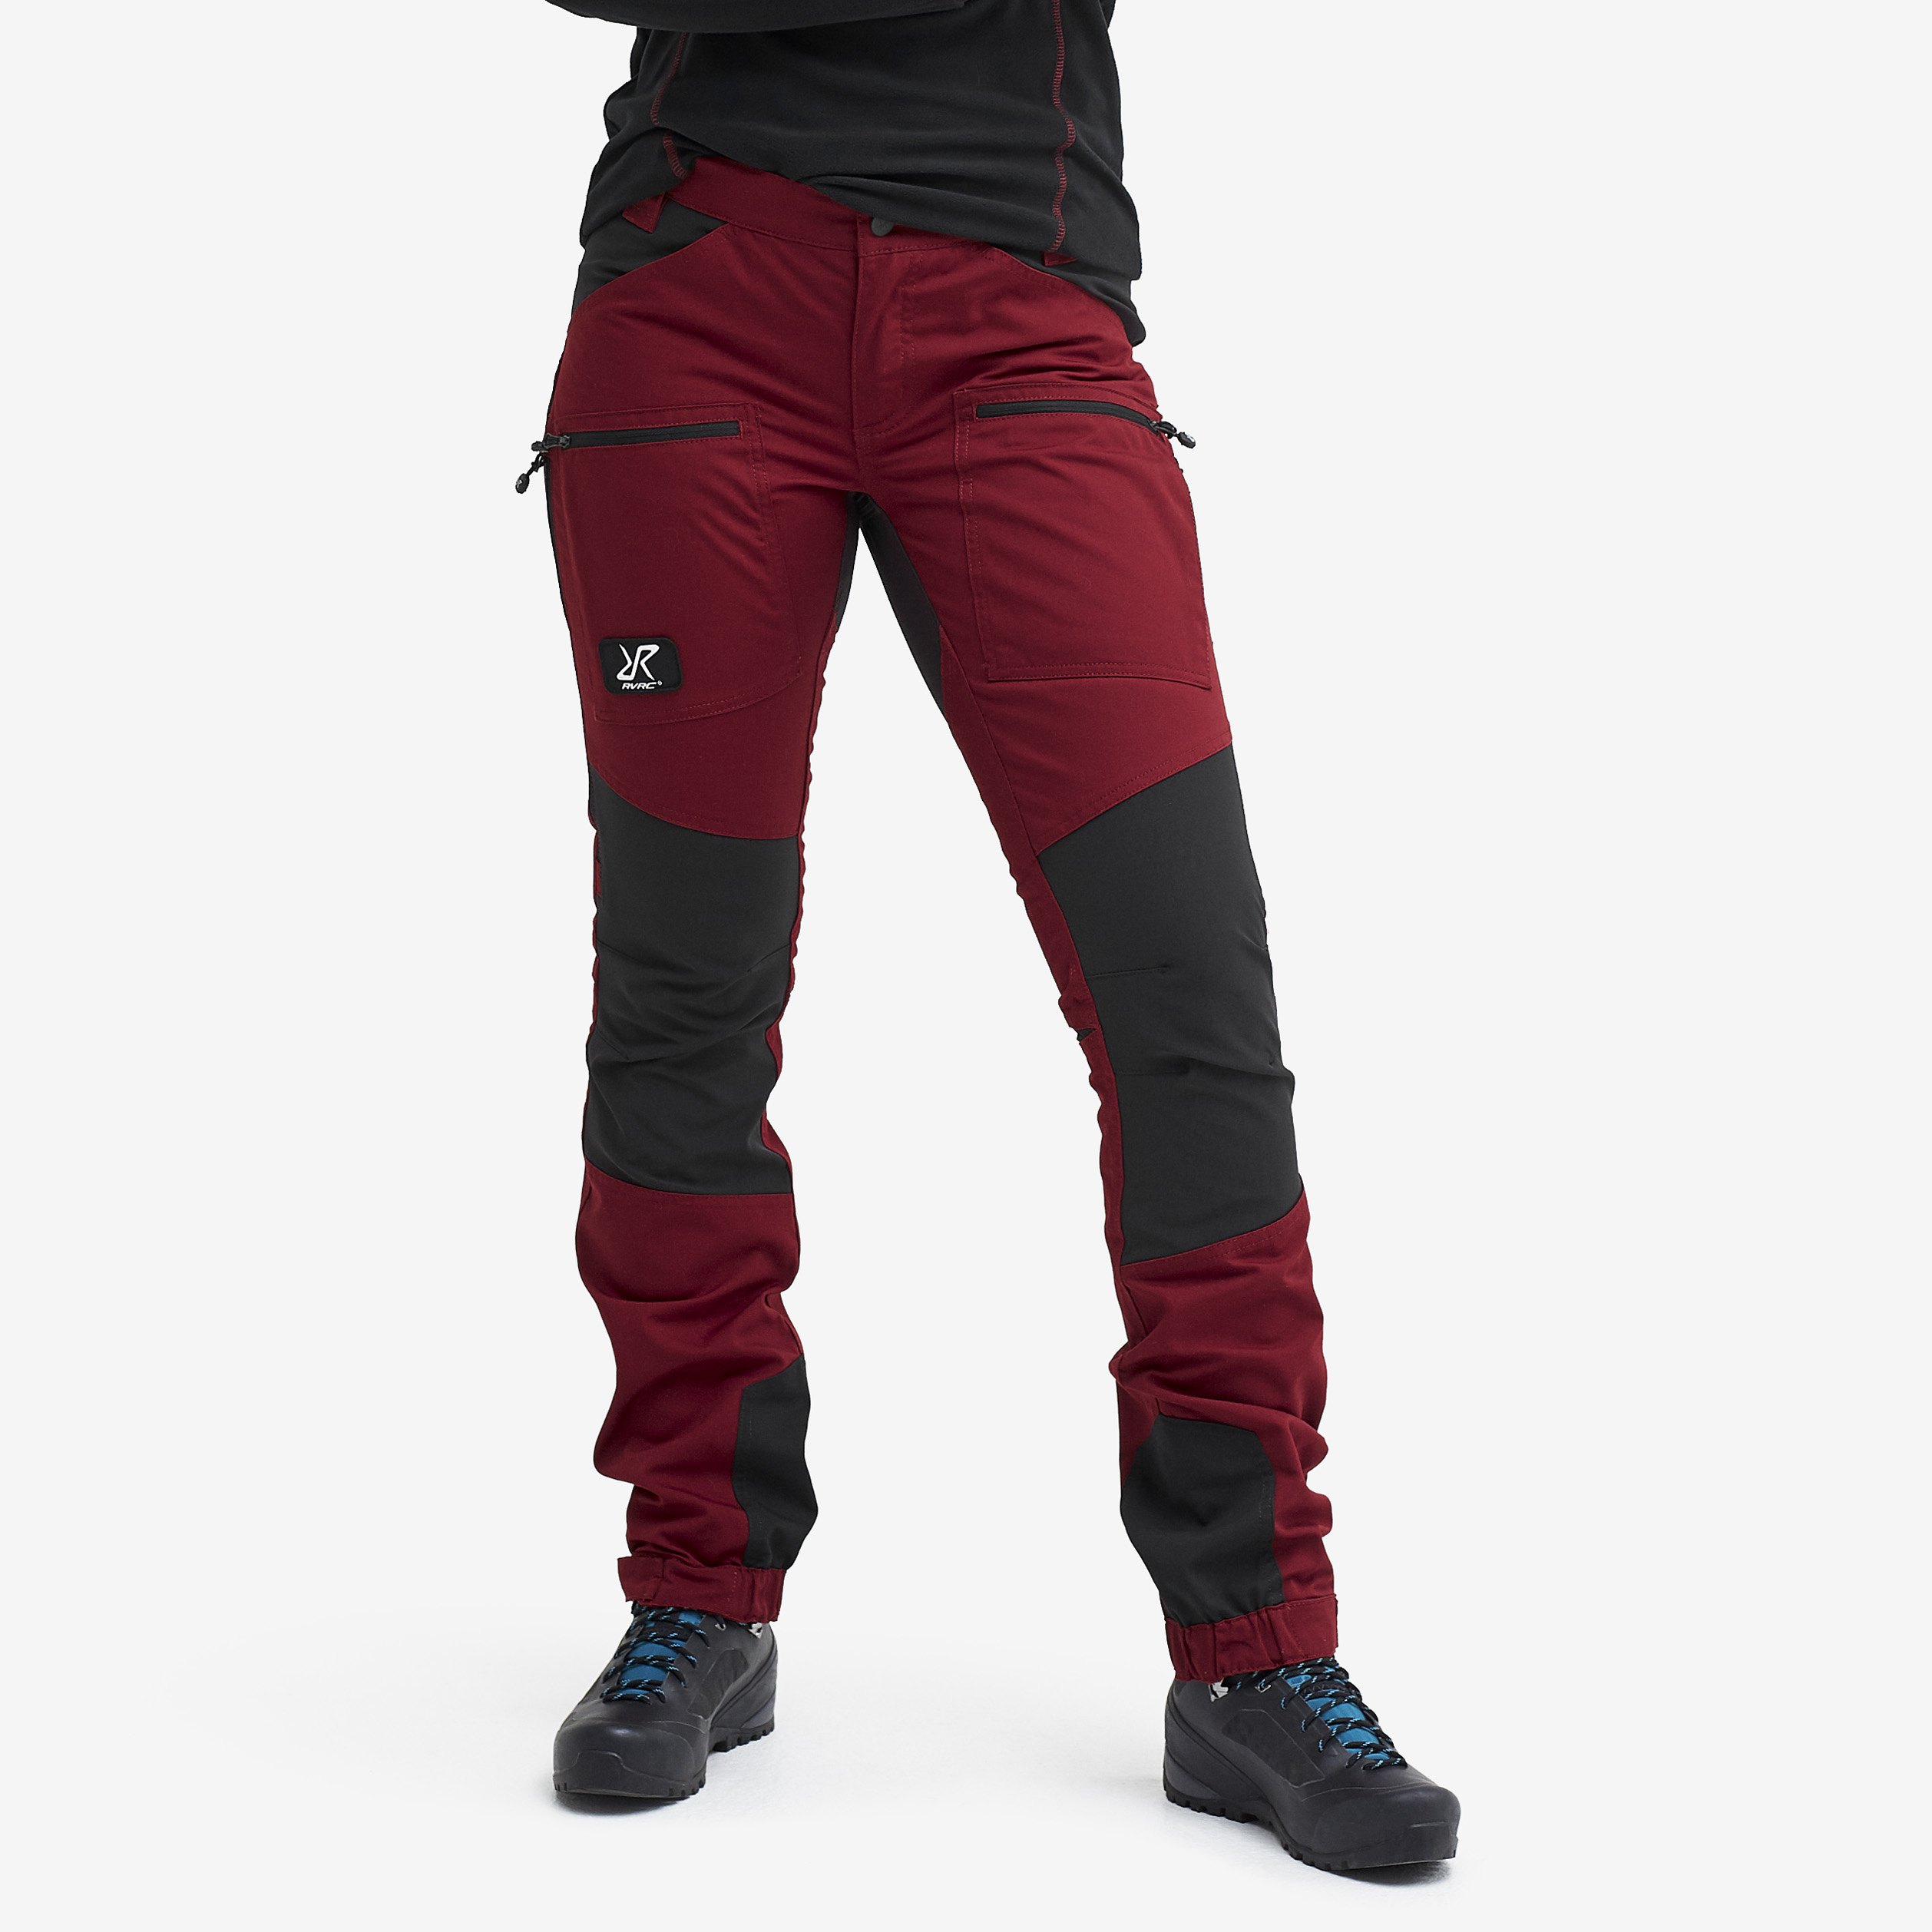 Nordwand Pro Pants Wine Red Mujeres